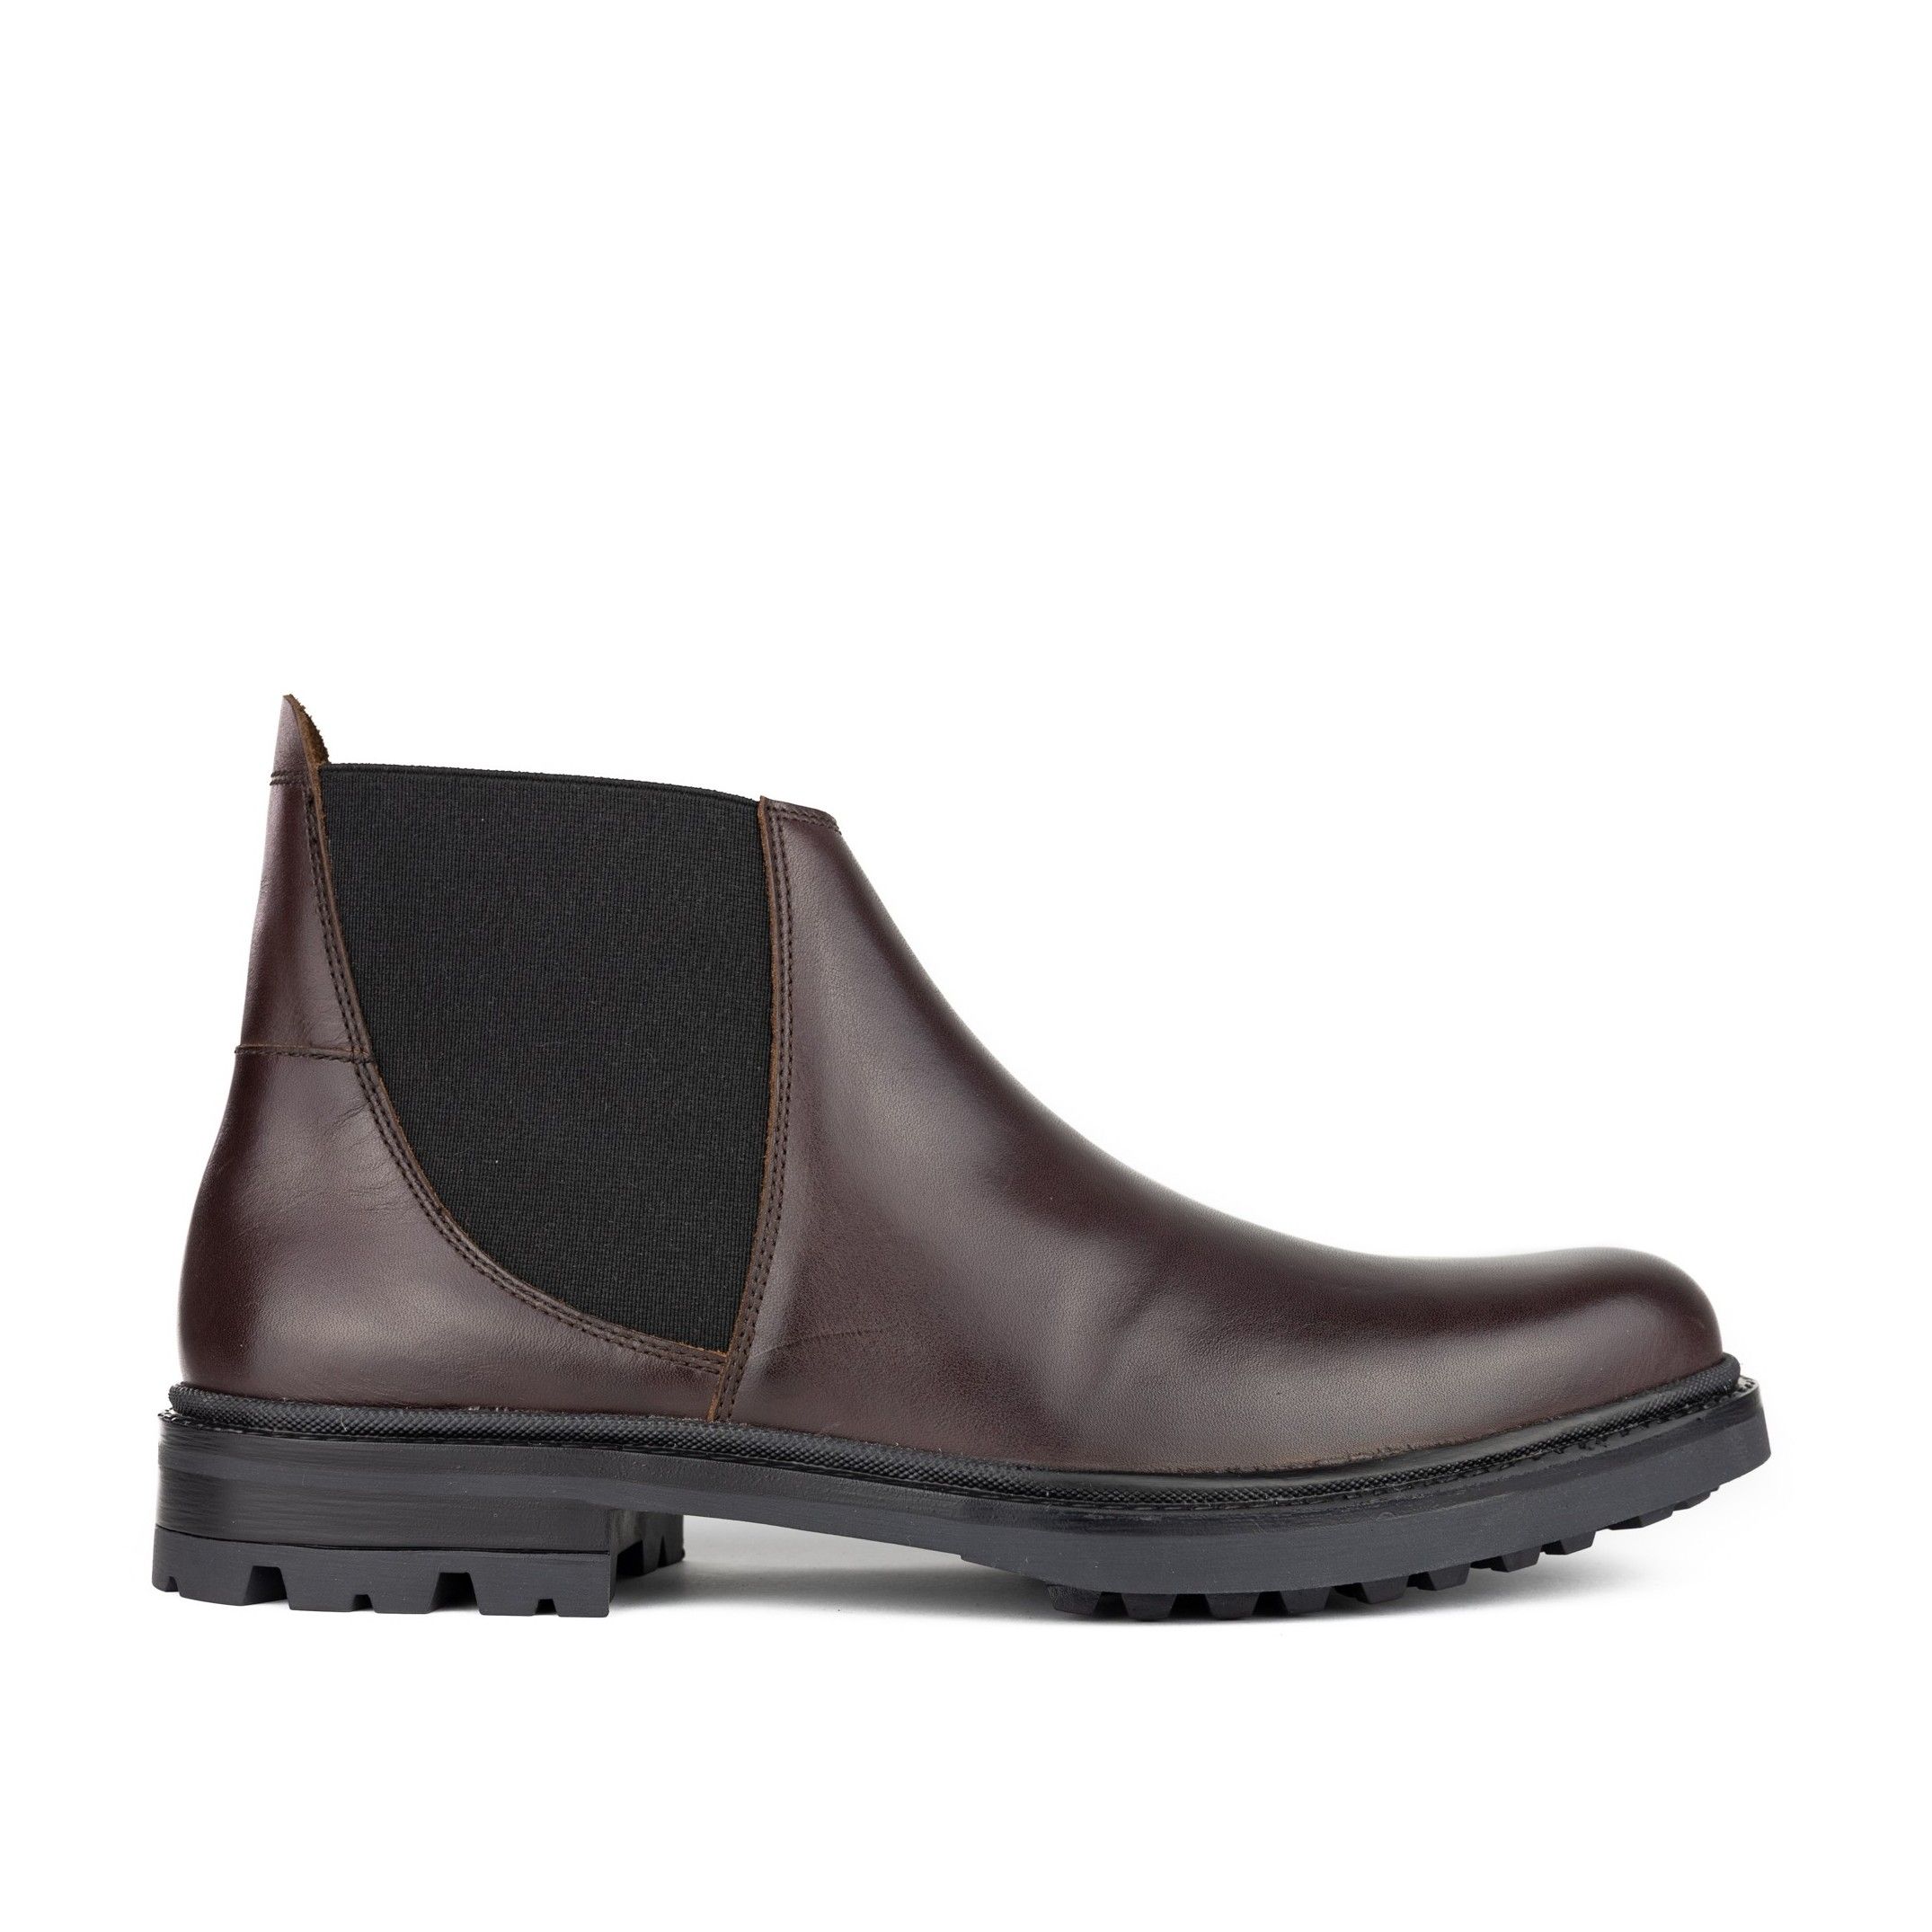 Chelsea boot in leather by Son Castellanisimos. Closure: elastic. Exterior: leather. Interior: leather. Plant: skin. Sole: TR slip resistant. Platform: 1 cm. Heel: 3 cm. Shaft height: 10.5 cm. Made in Spain.